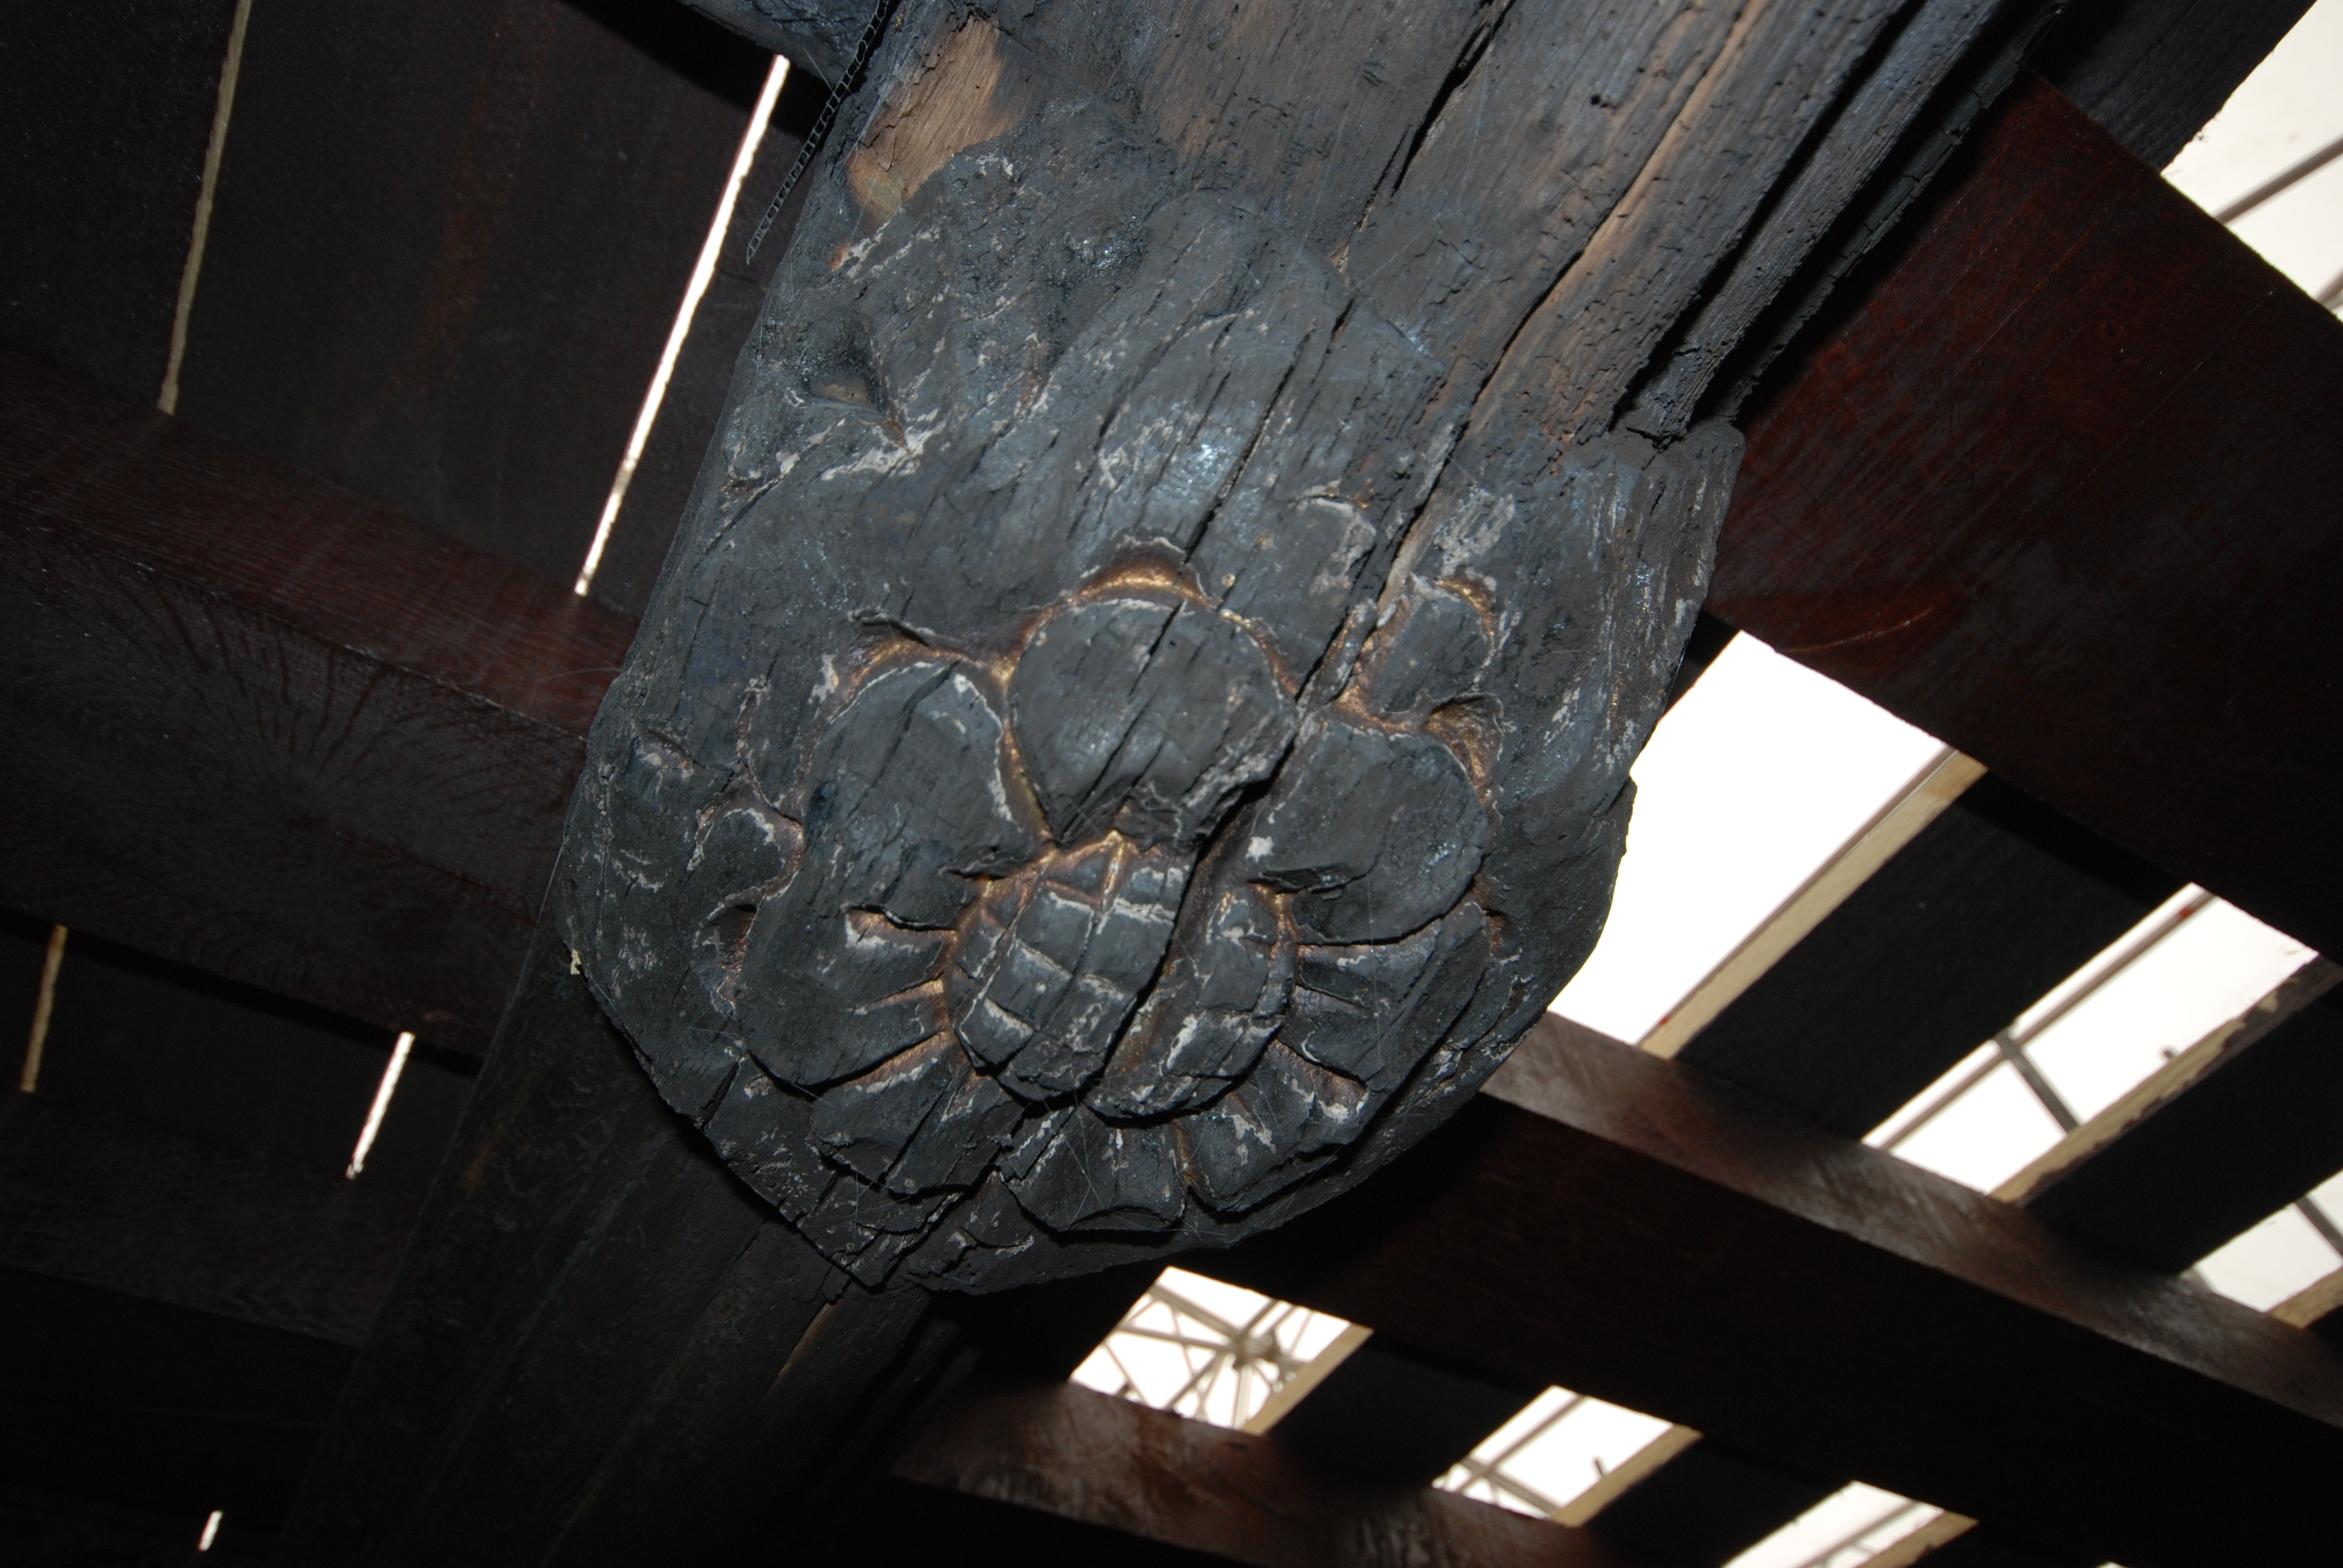 Charred surface of a boss from the ceiling of the nave